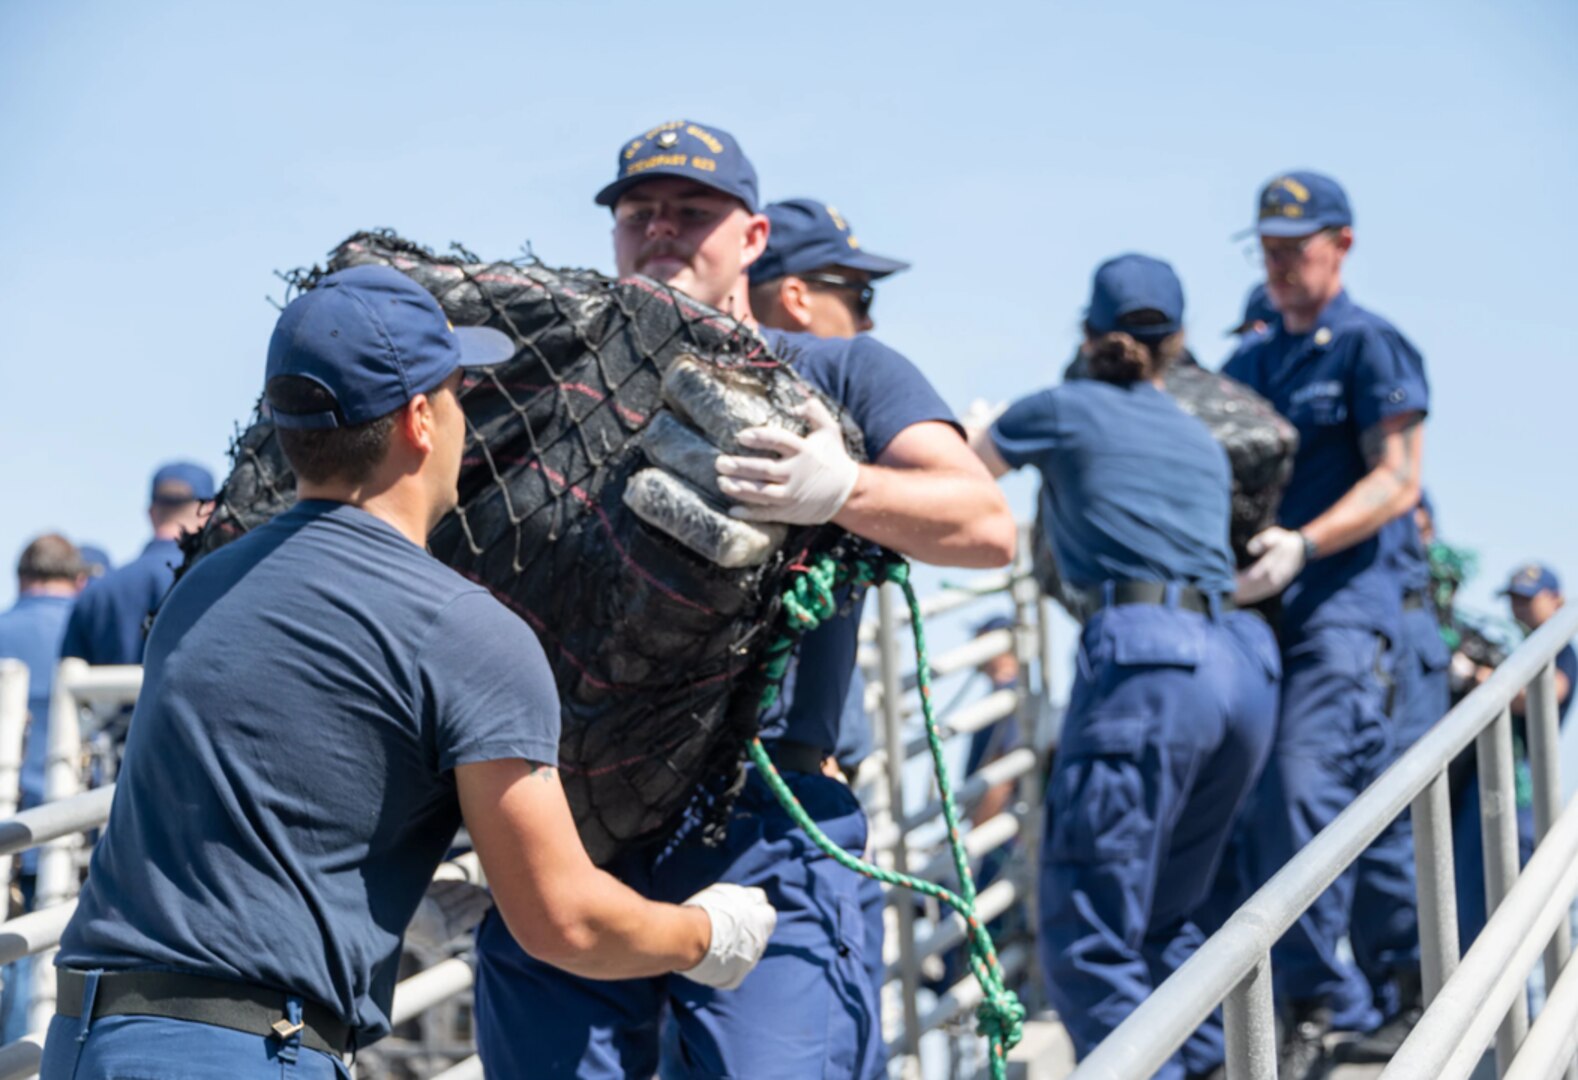 The crew of the Coast Guard Cutter Steadfast (WMEC 623) offloaded more than 11,600 pounds of cocaine and 5,500 pounds of marijuana worth an estimated $158 million in San Diego.